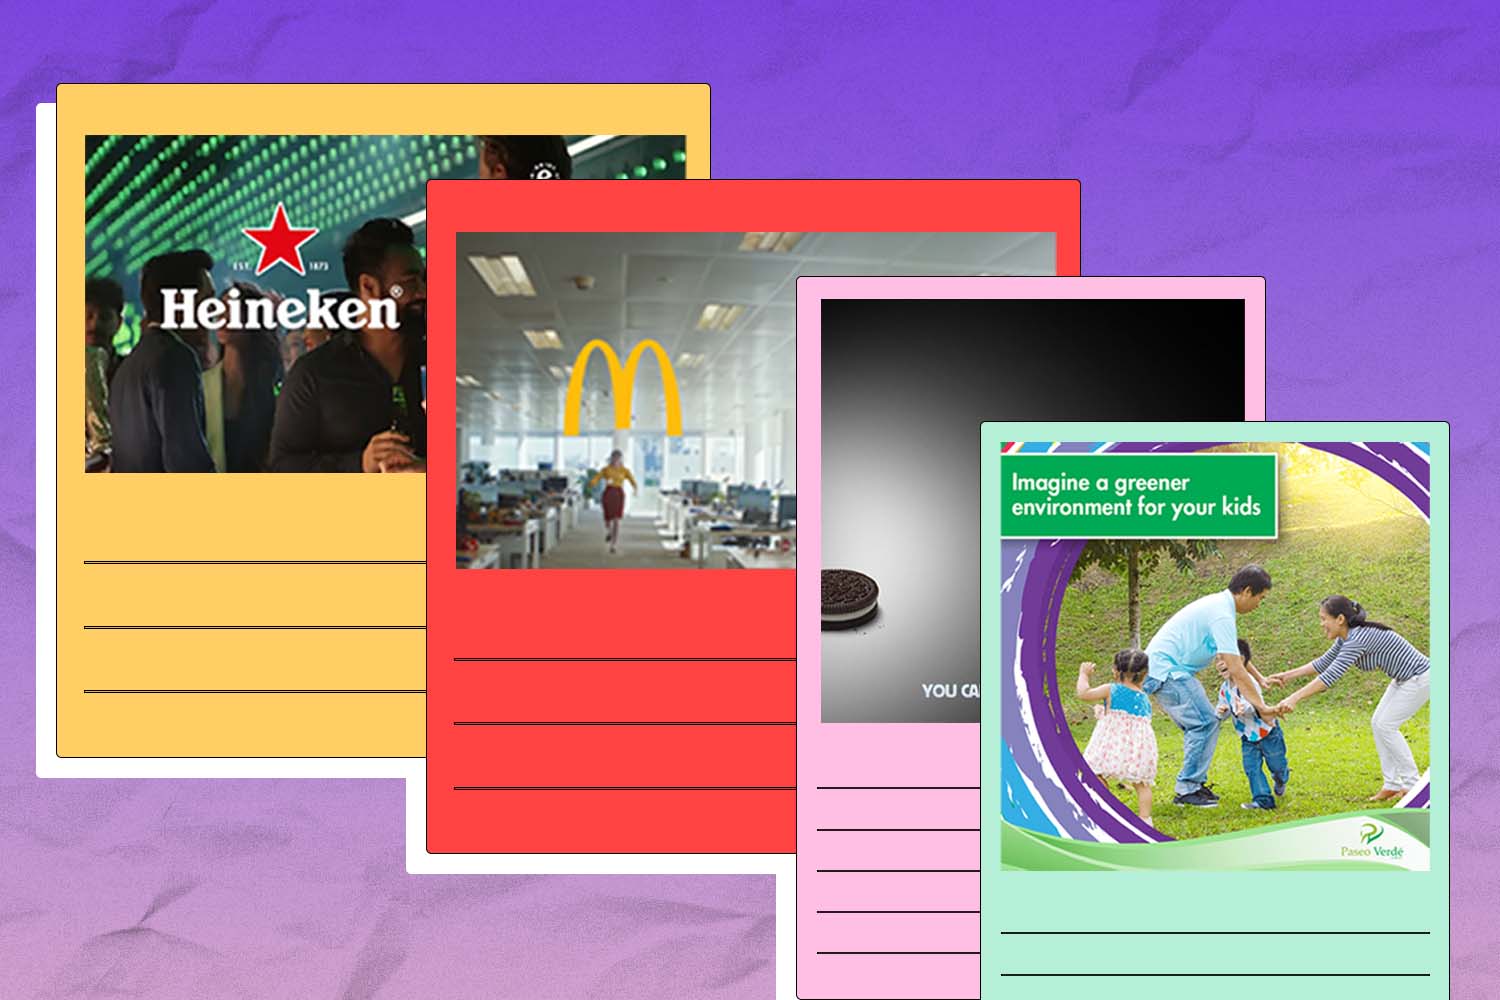 Digital marketing campaign examples including Heineken’s Cheers to all, McDonald's Raise your Arches, Oreo’s Dunk in then Dark, and Paseo Verde digital campaign.